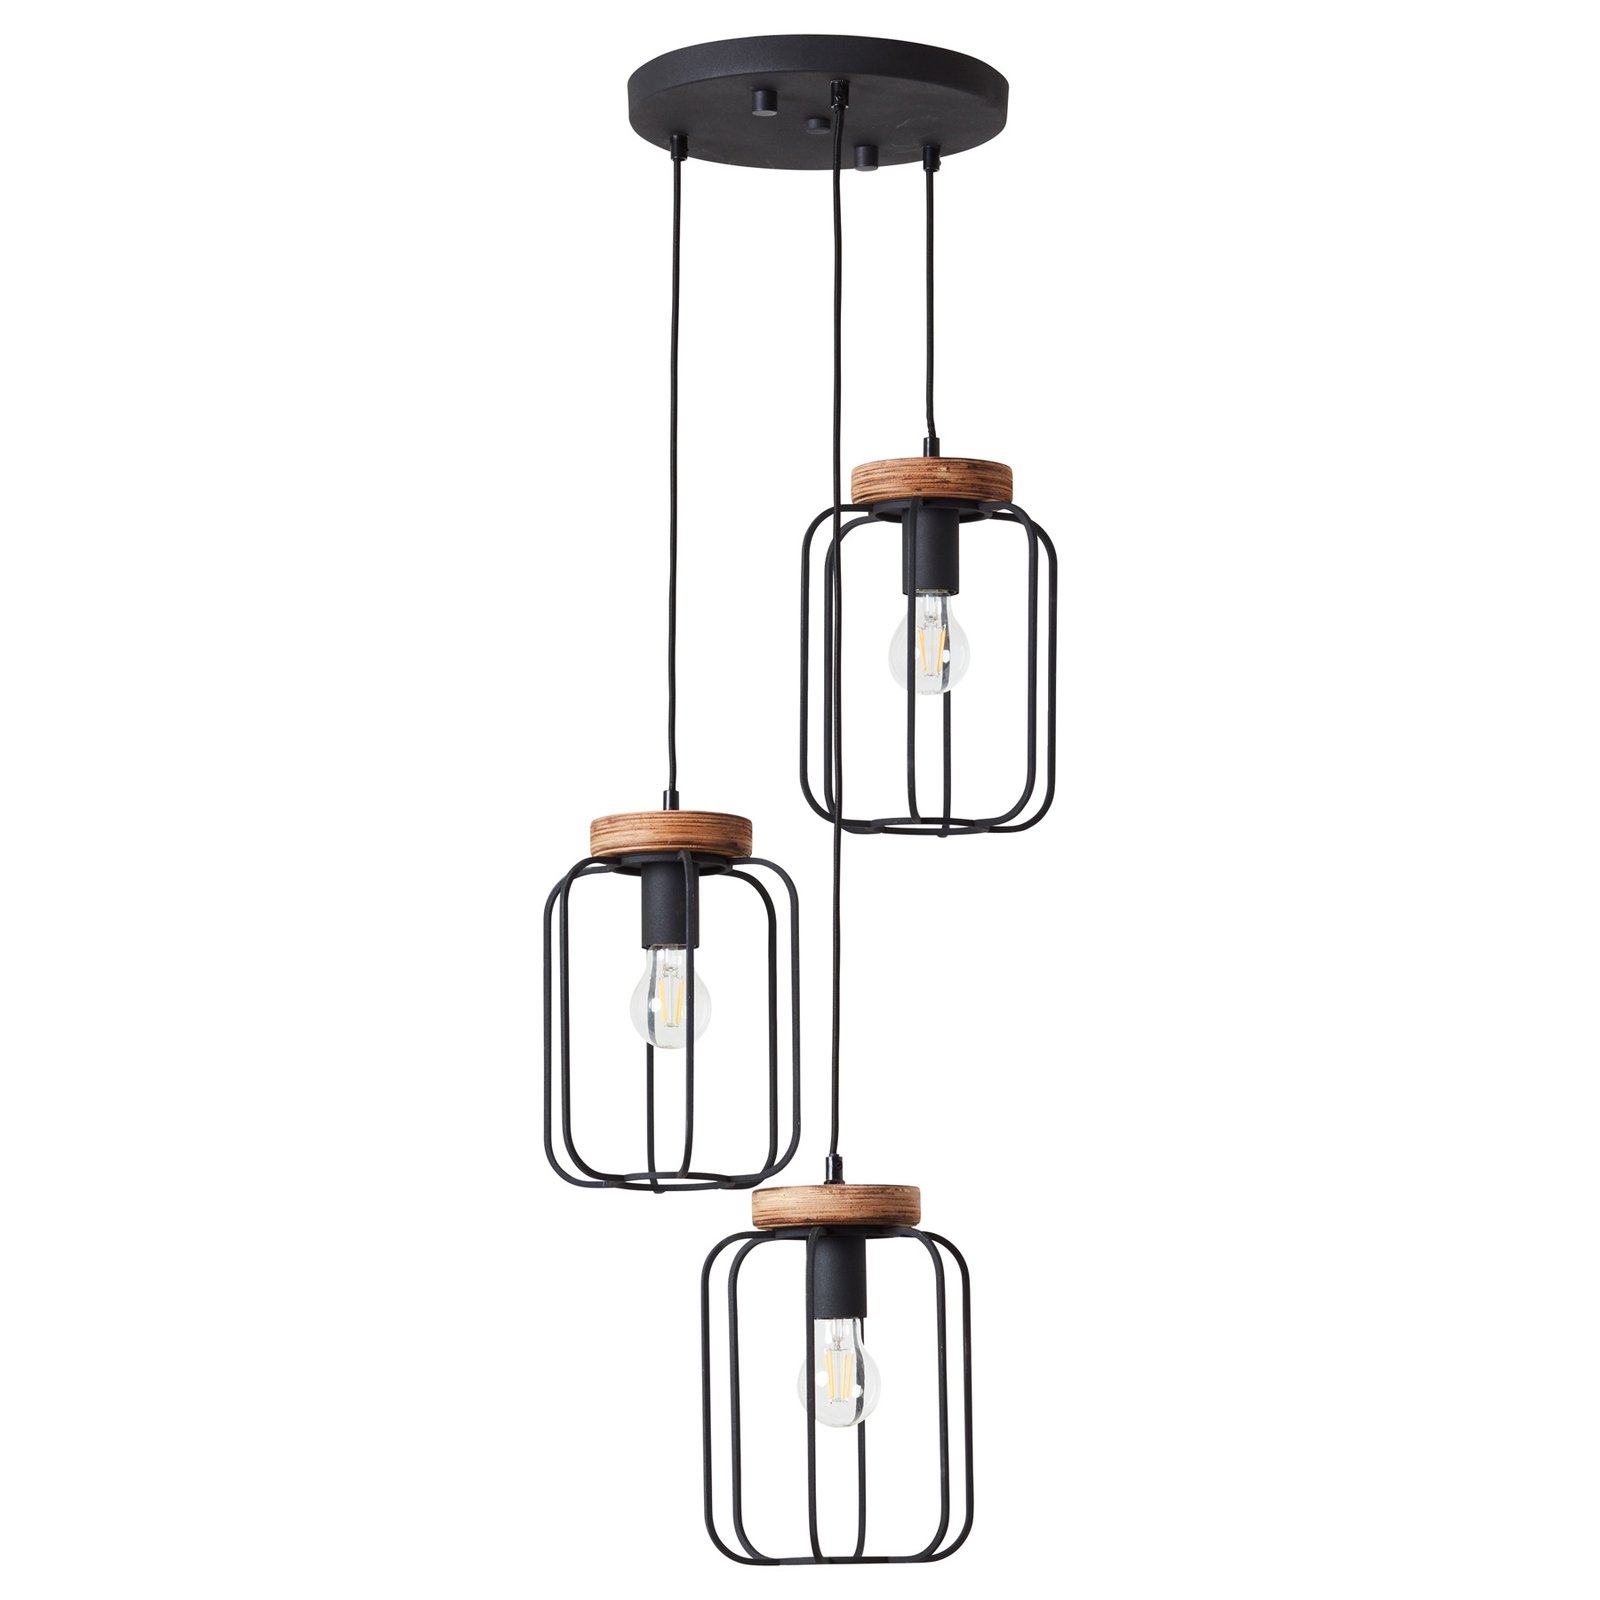 Hanglamp Tosh 3-lamps rondell